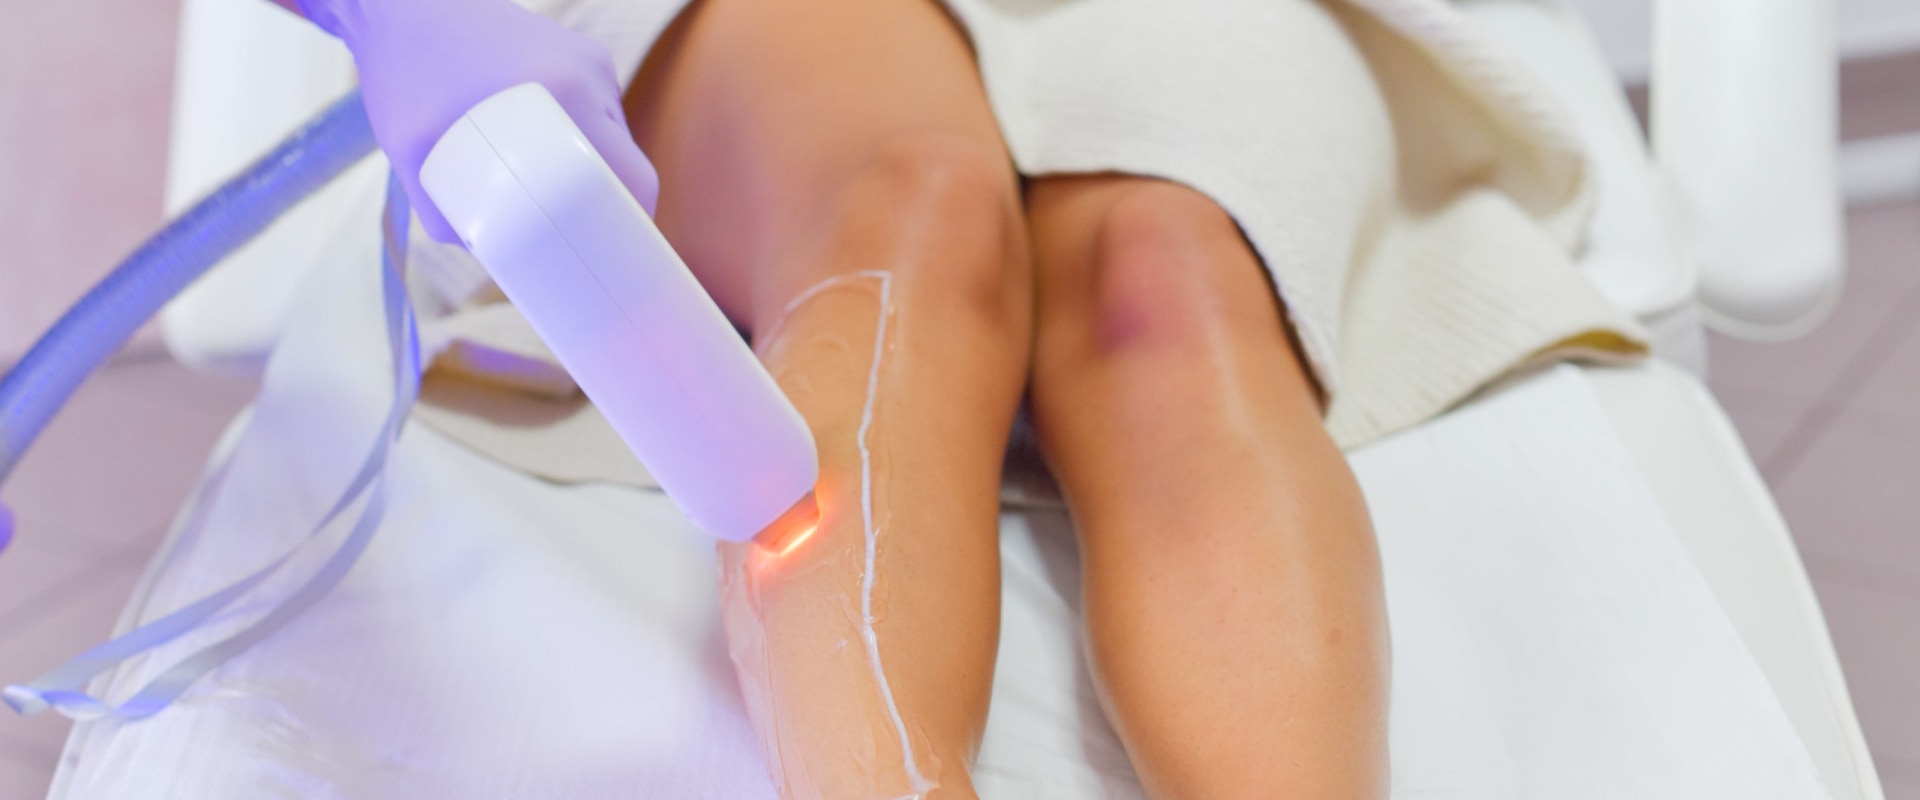 Are Laser Hair Removal Devices Safe and Effective?